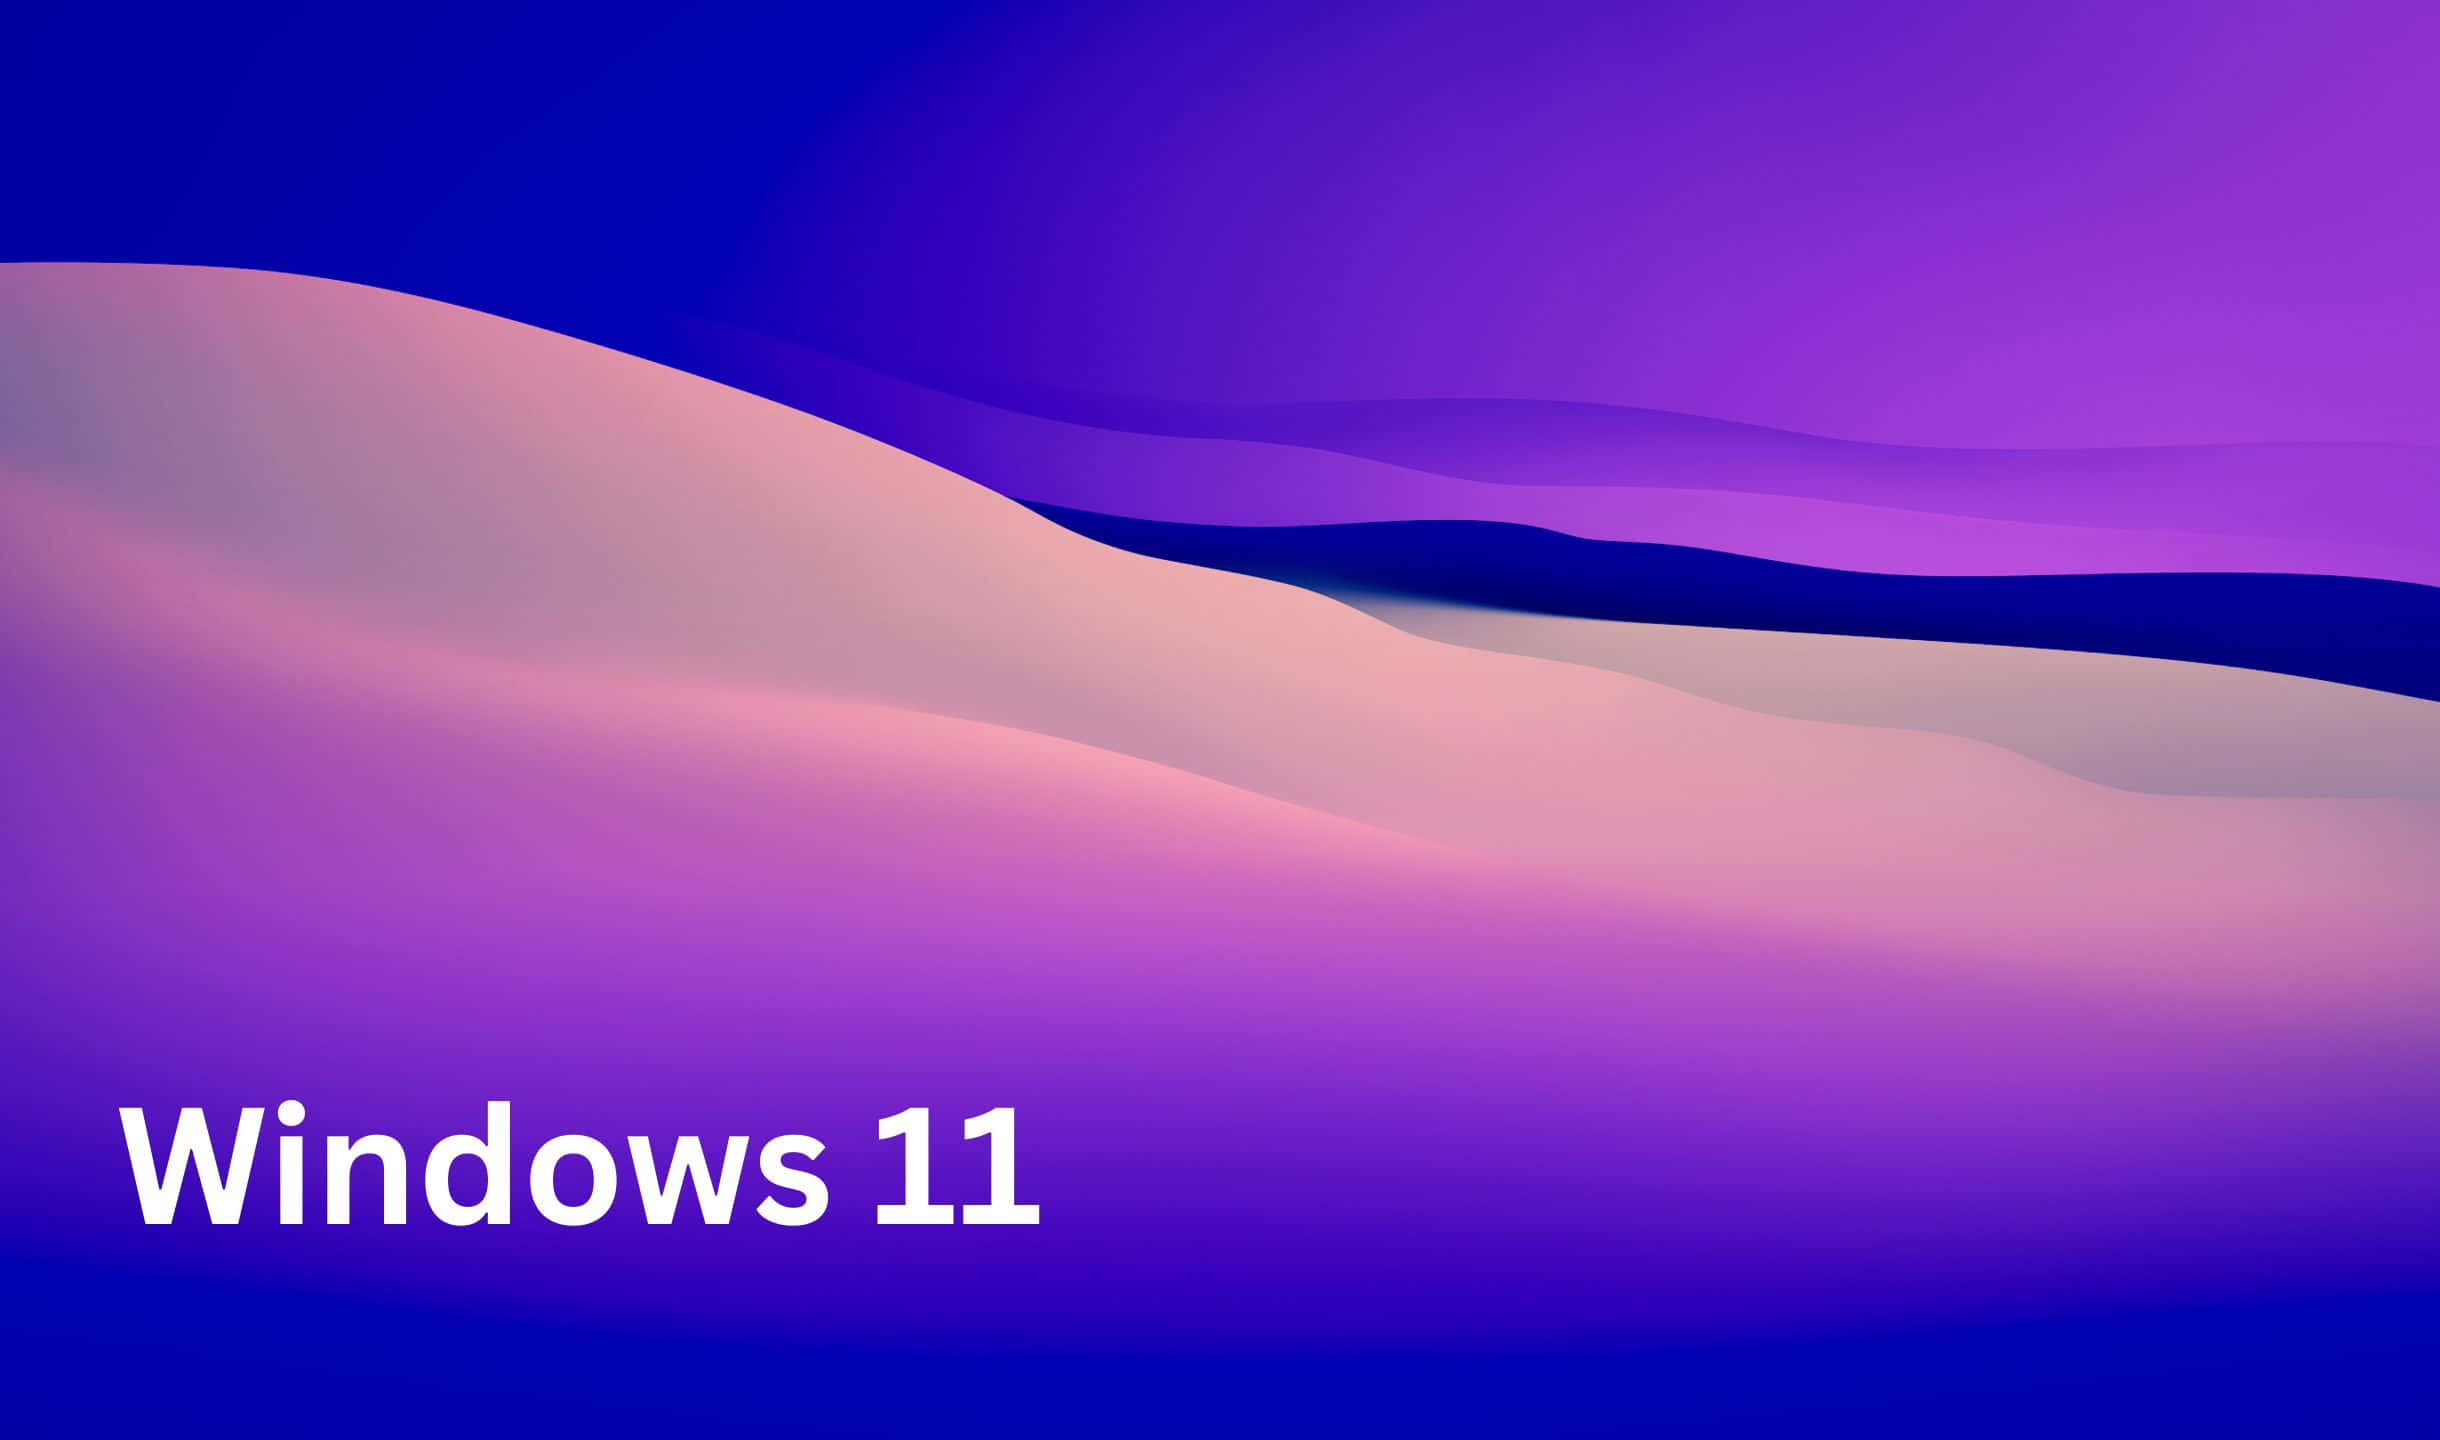 Download Windows 11 Wallpaper With A Purple Background | Wallpapers.com